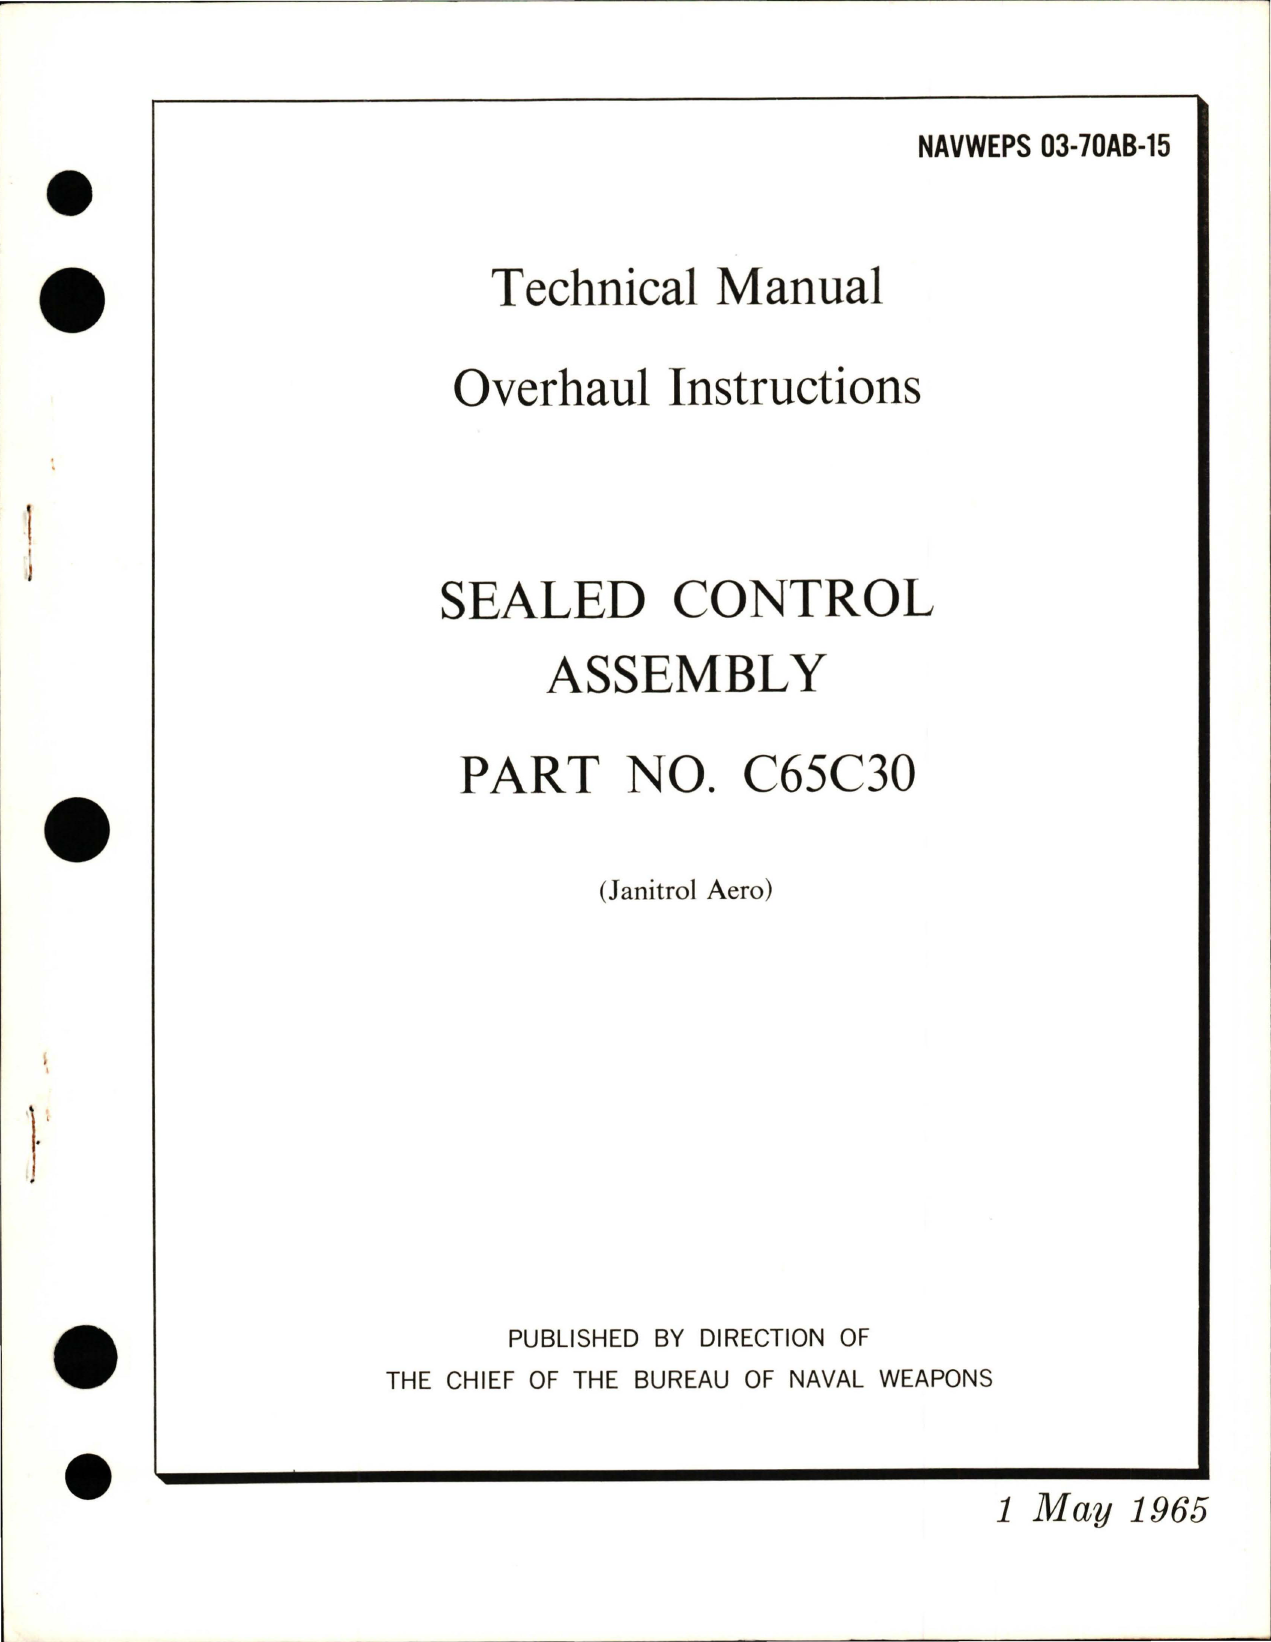 Sample page 1 from AirCorps Library document: Overhaul Instructions for Sealed Control Assembly - Part C65C30